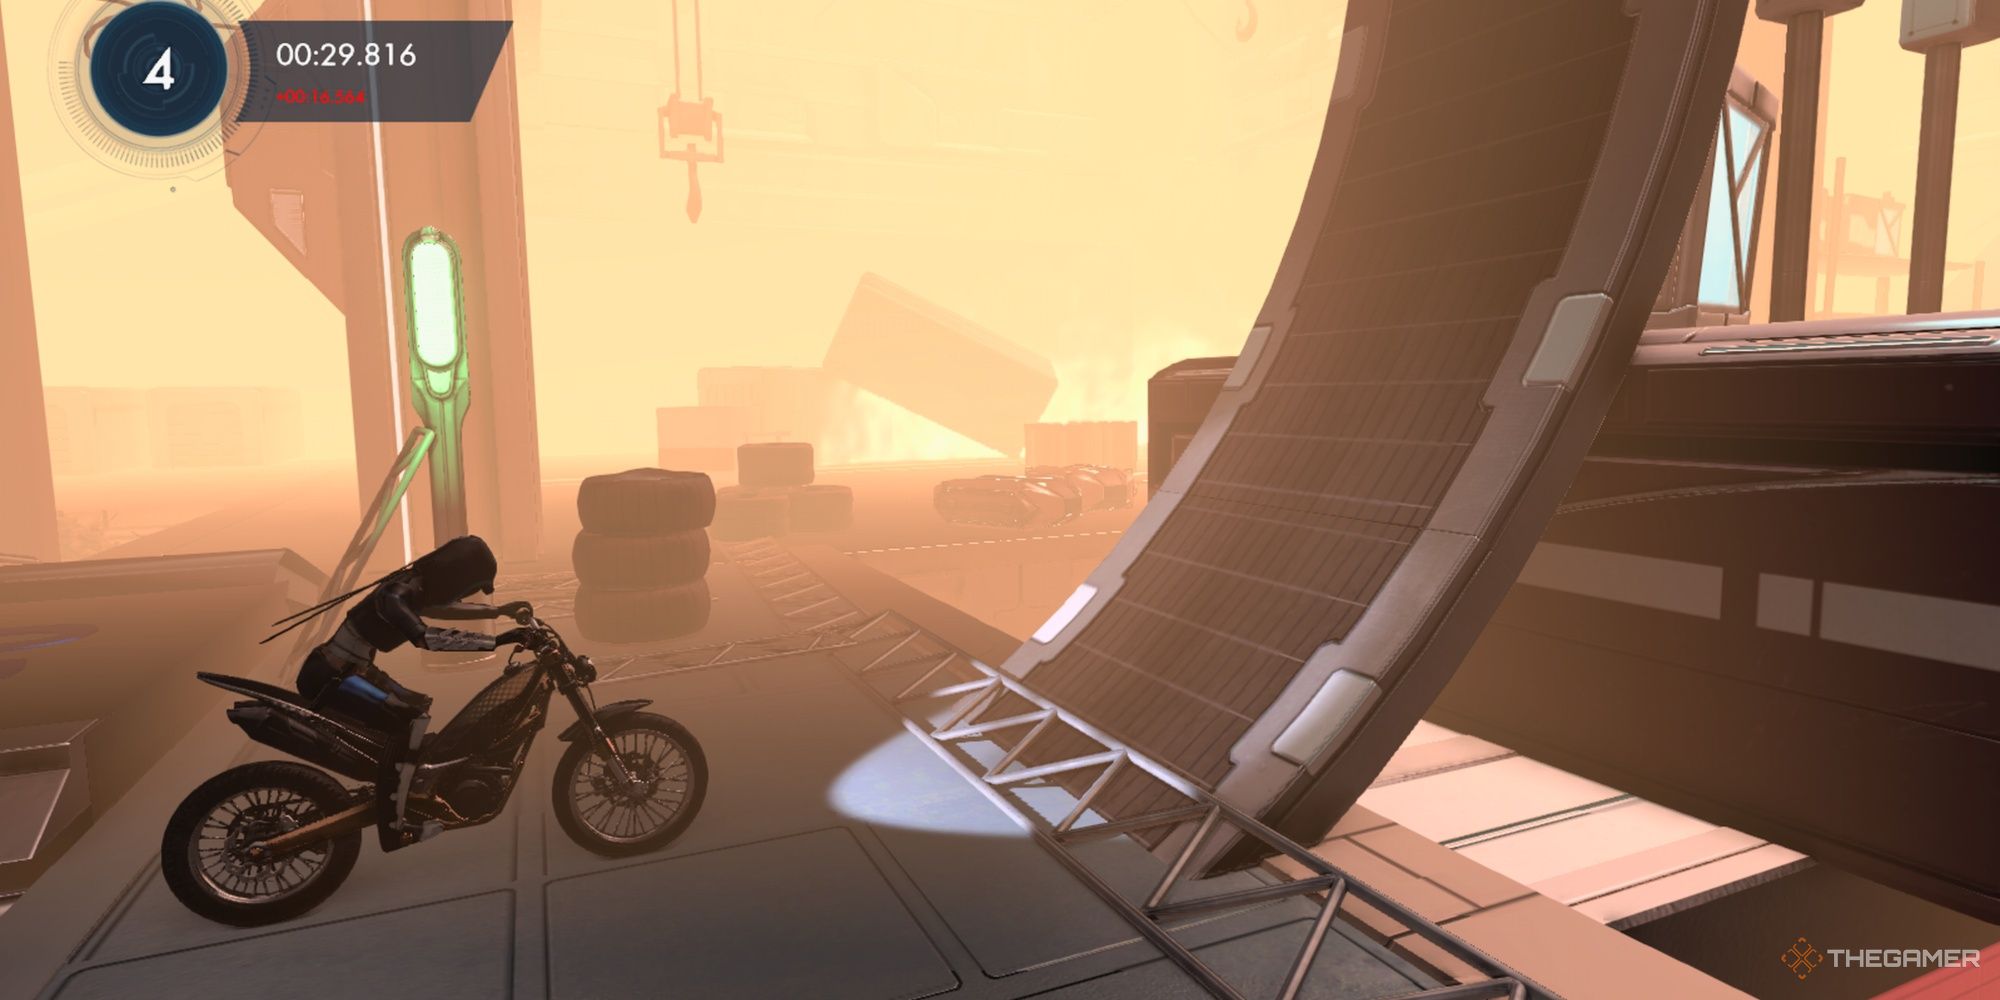 The third checkpoint of Inferno 4 in Trials Fusion